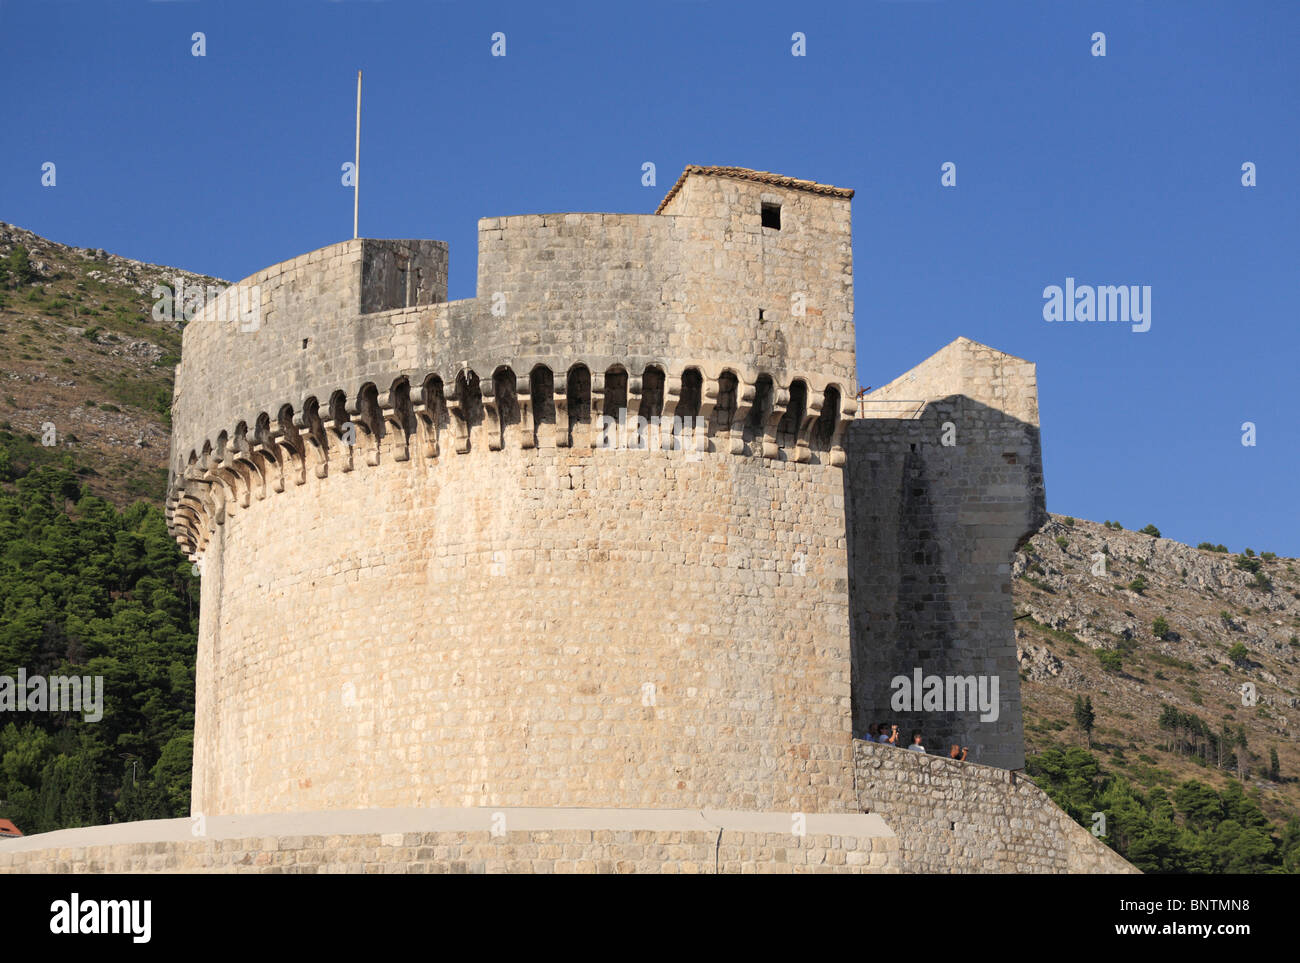 Castle tower and ramparts of the fortified city wall around the Old Town area of Dubrovnik Croatia Stock Photo